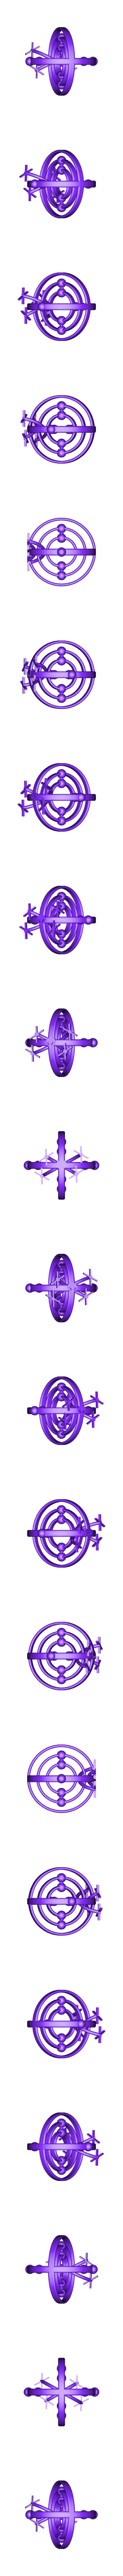 GyroThingyOnePiece.stl Download free STL file GyroThingy • 3D printing template, ykratter